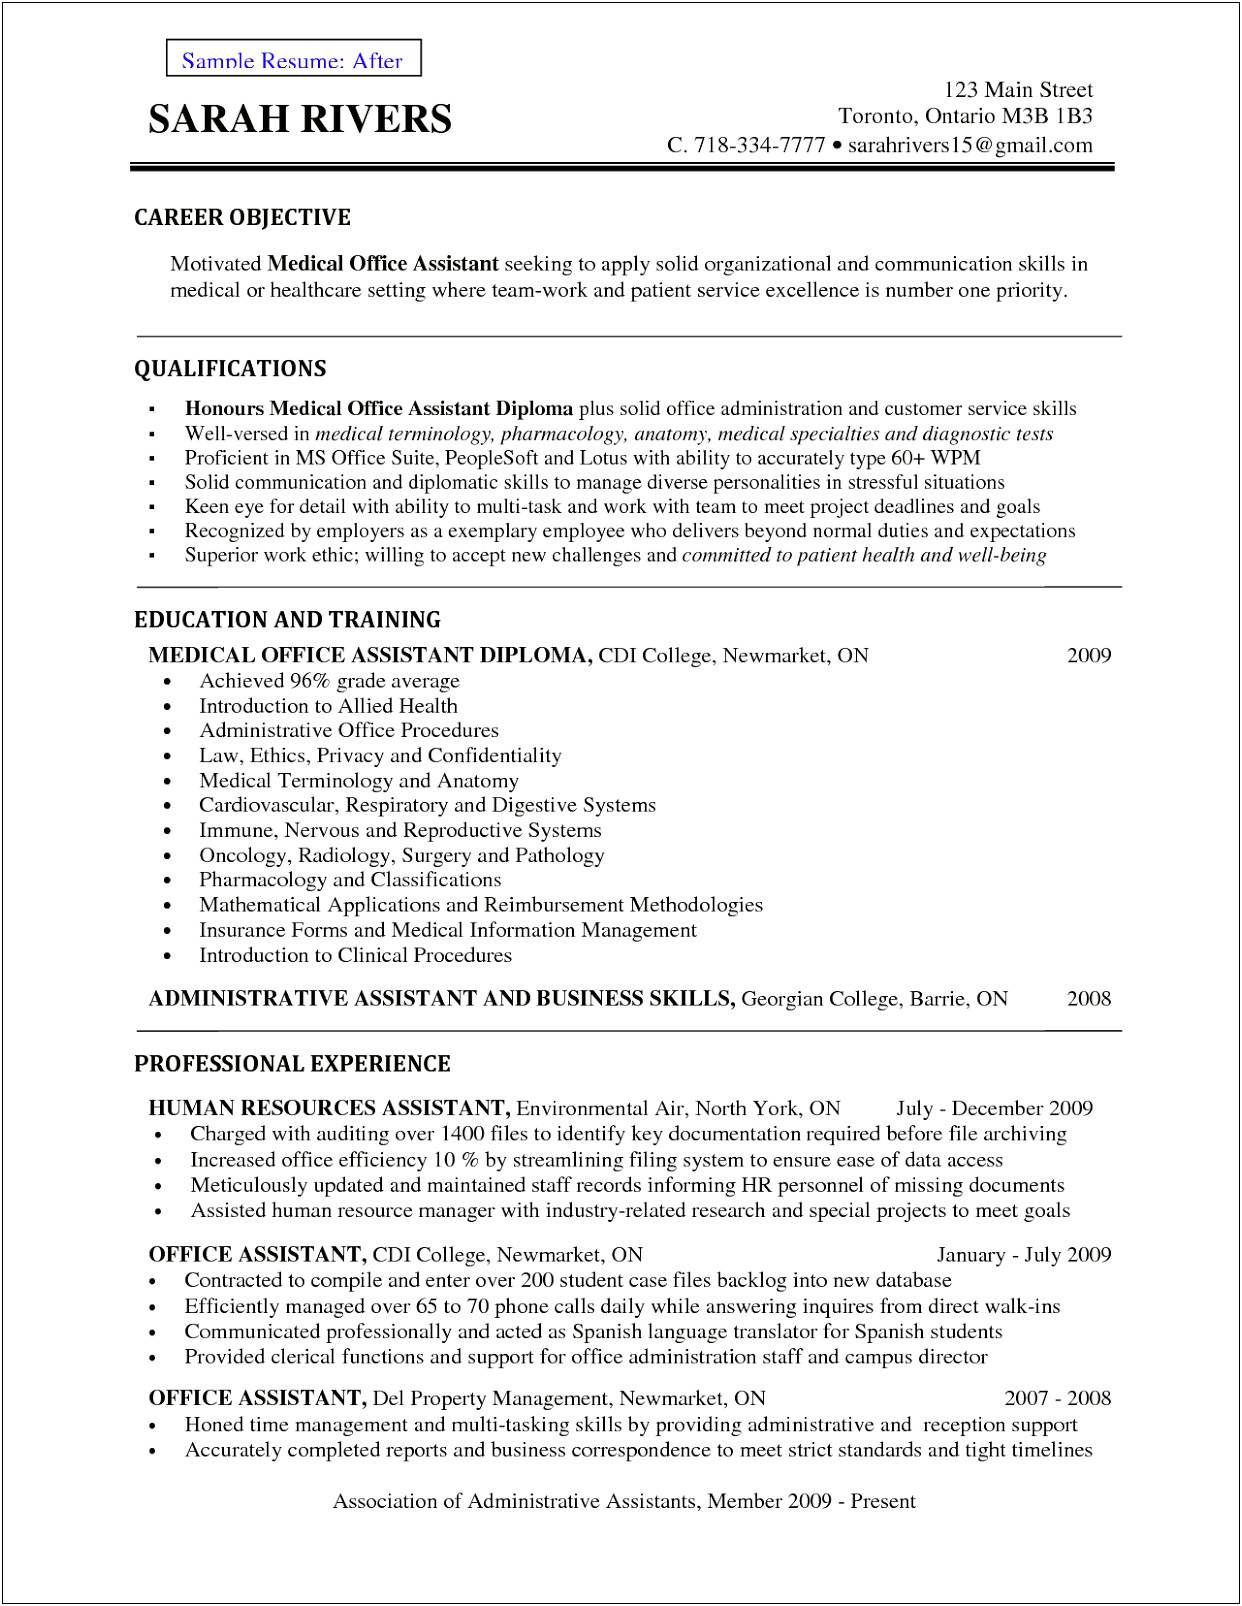 Resume Objective For Administrative Work